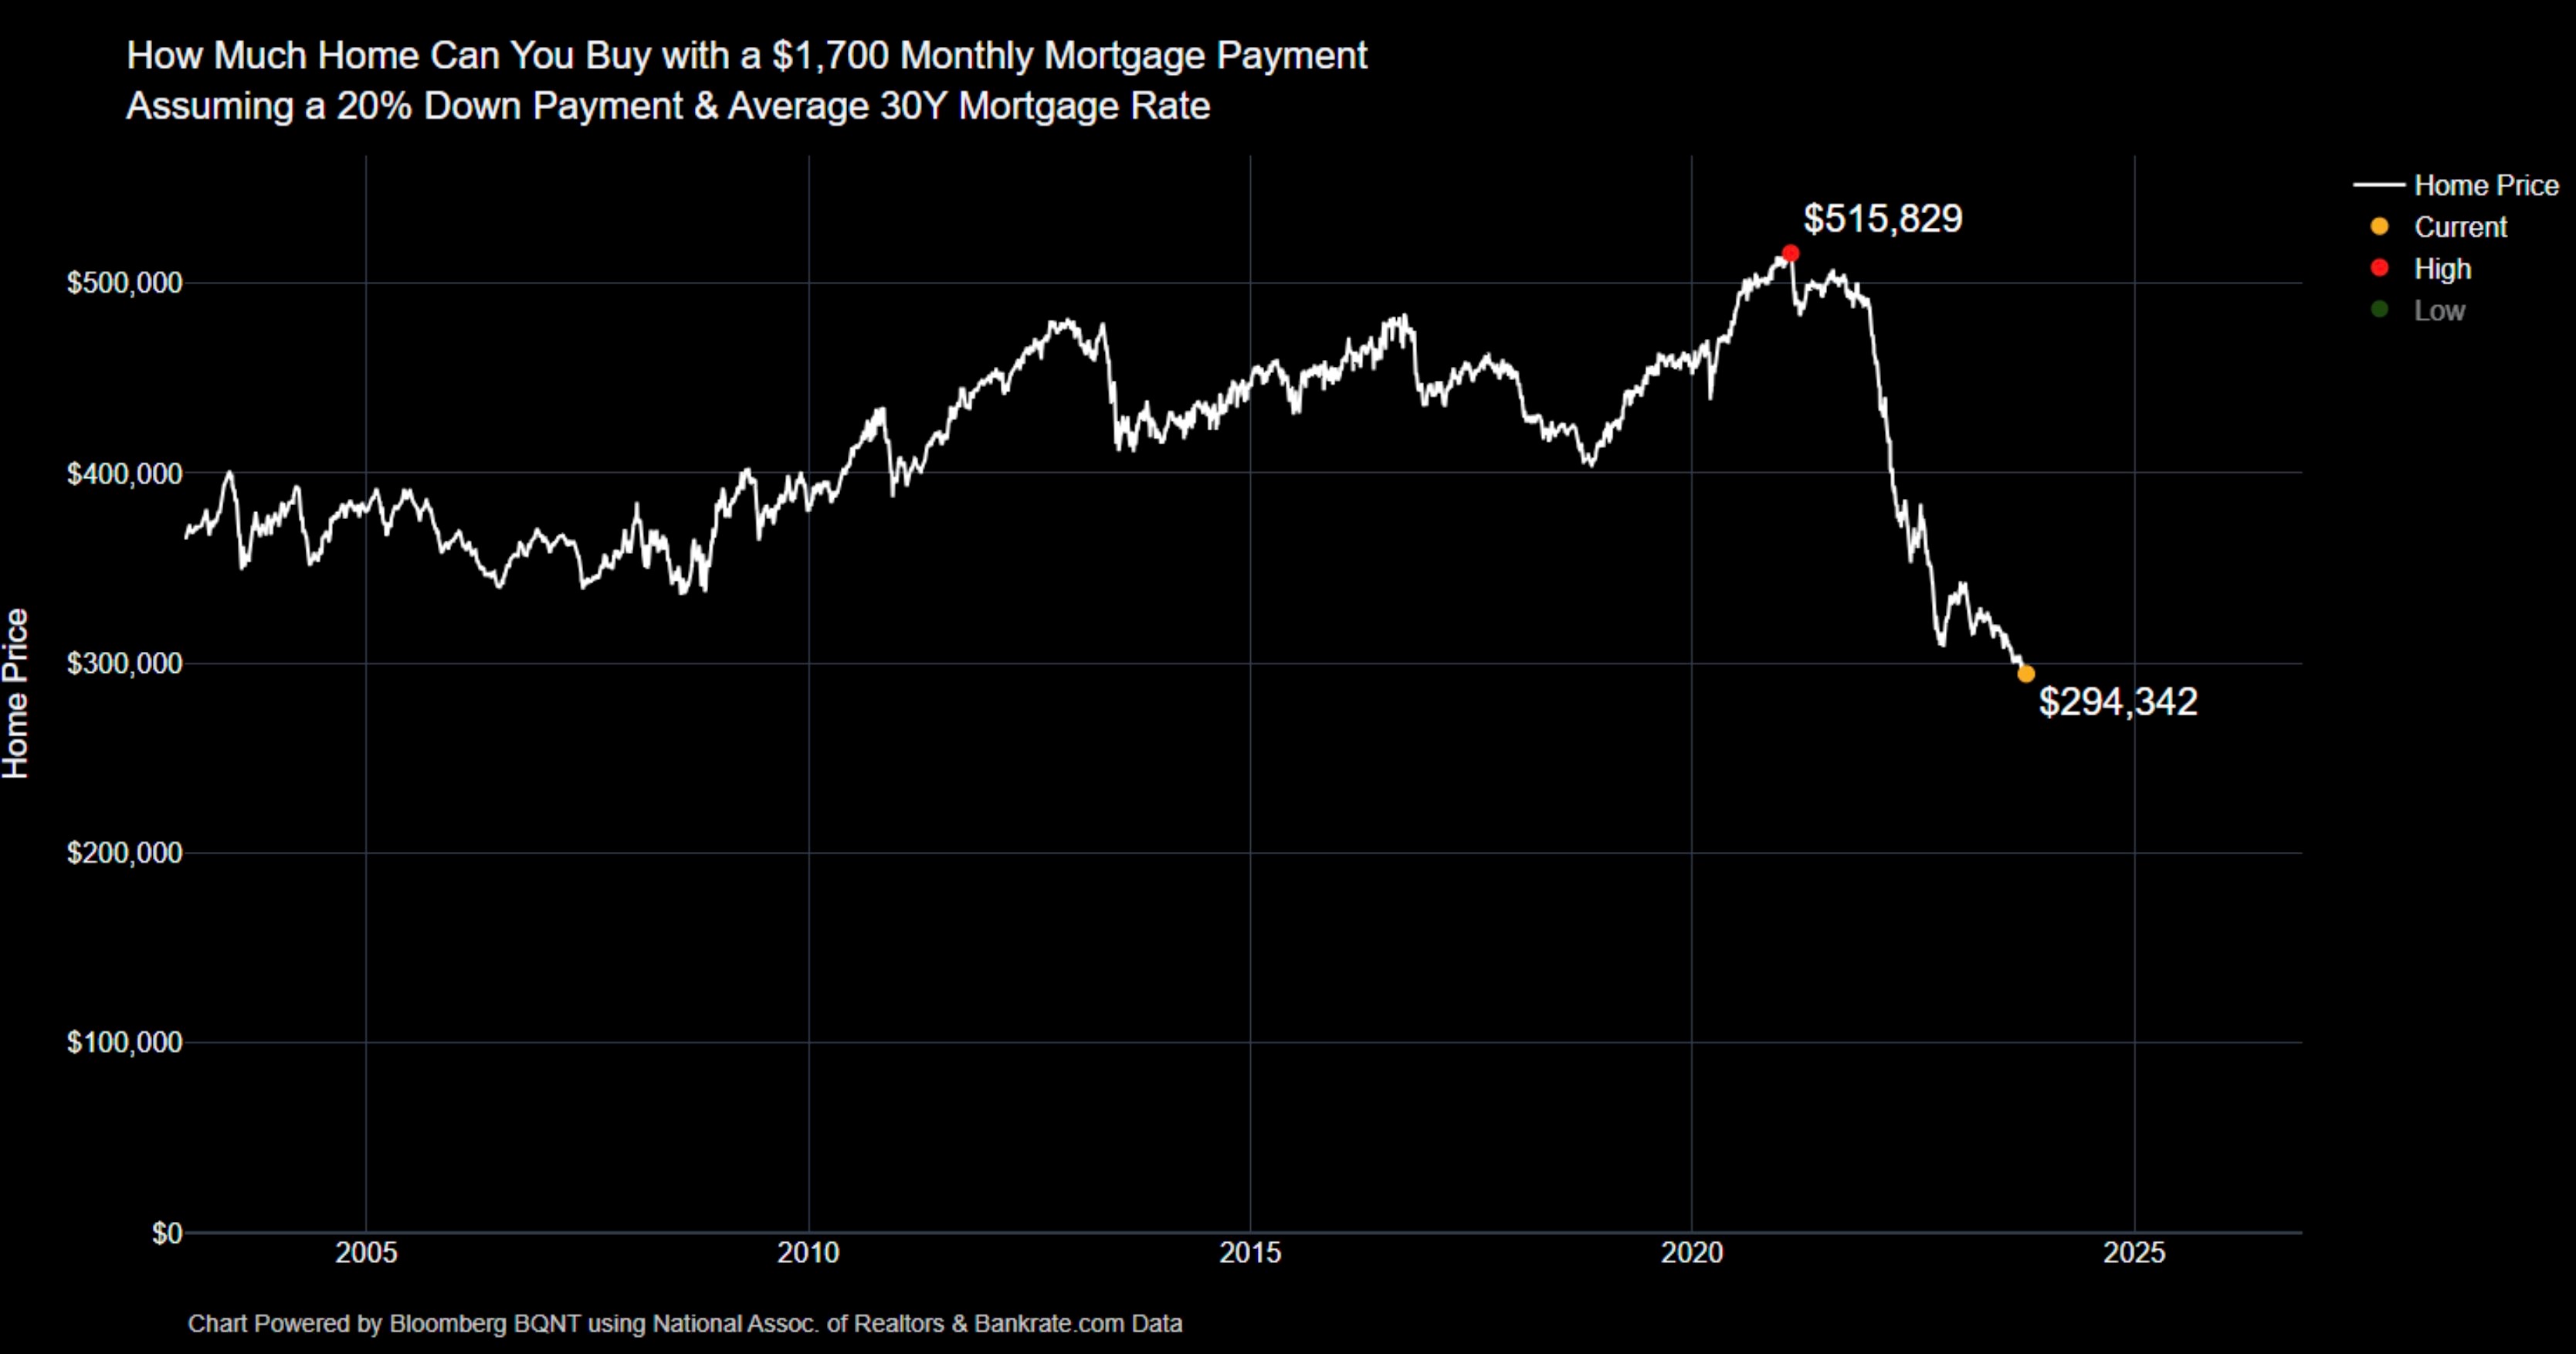 Jim Egan on the Impact of an 8% Mortgage Rate - Bloomberg